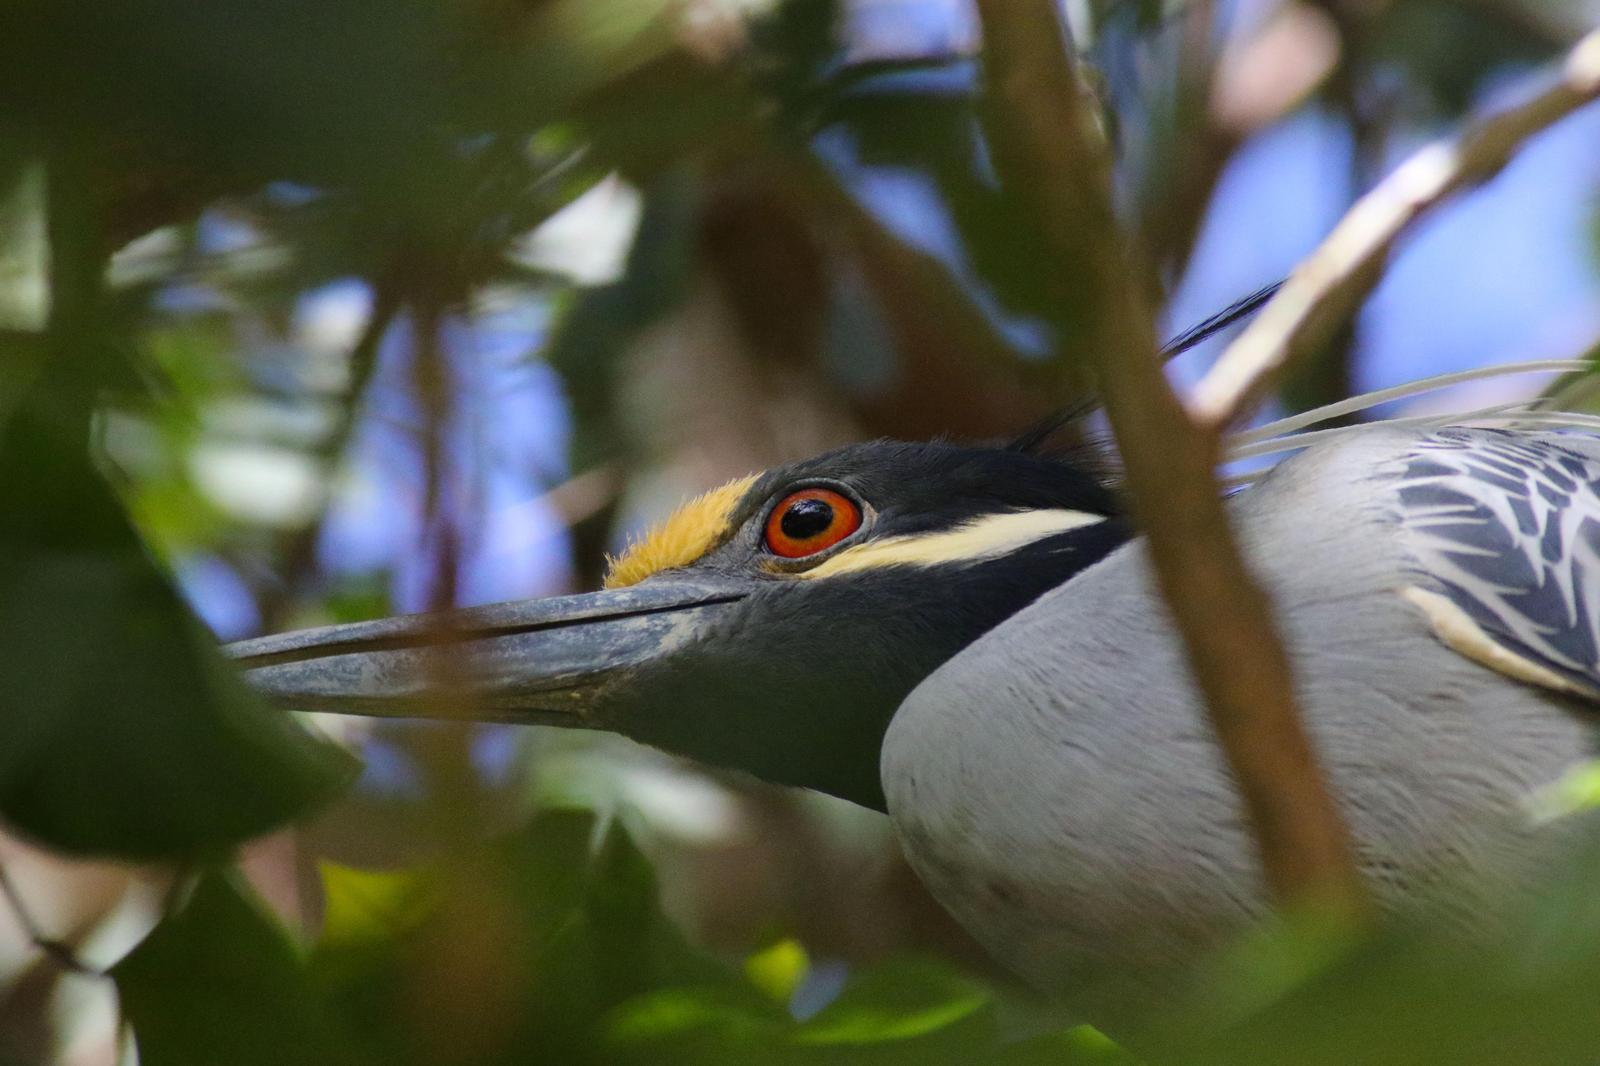 Yellow-crowned Night-Heron (Yellow-crowned) Photo by Tom Ford-Hutchinson